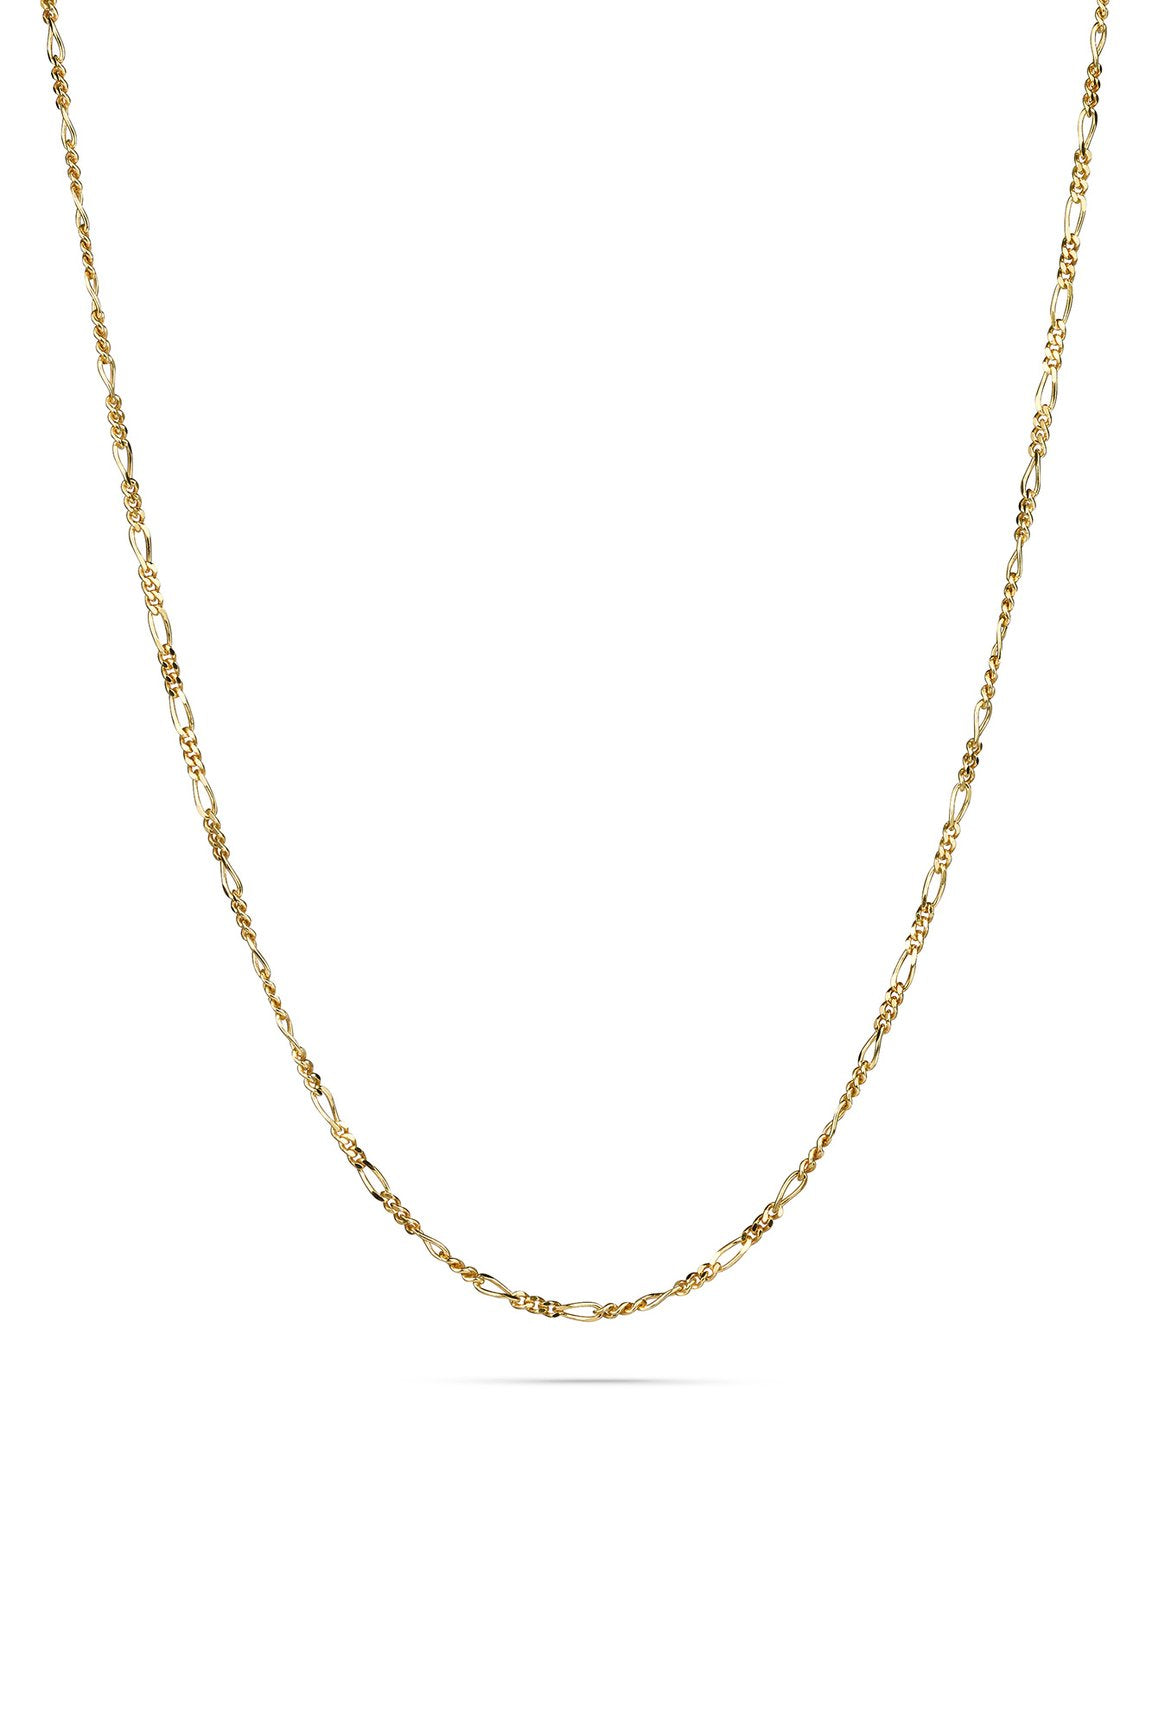 THIN CHAIN NECKLACE IN GOLD - BEYOND STUDIOS